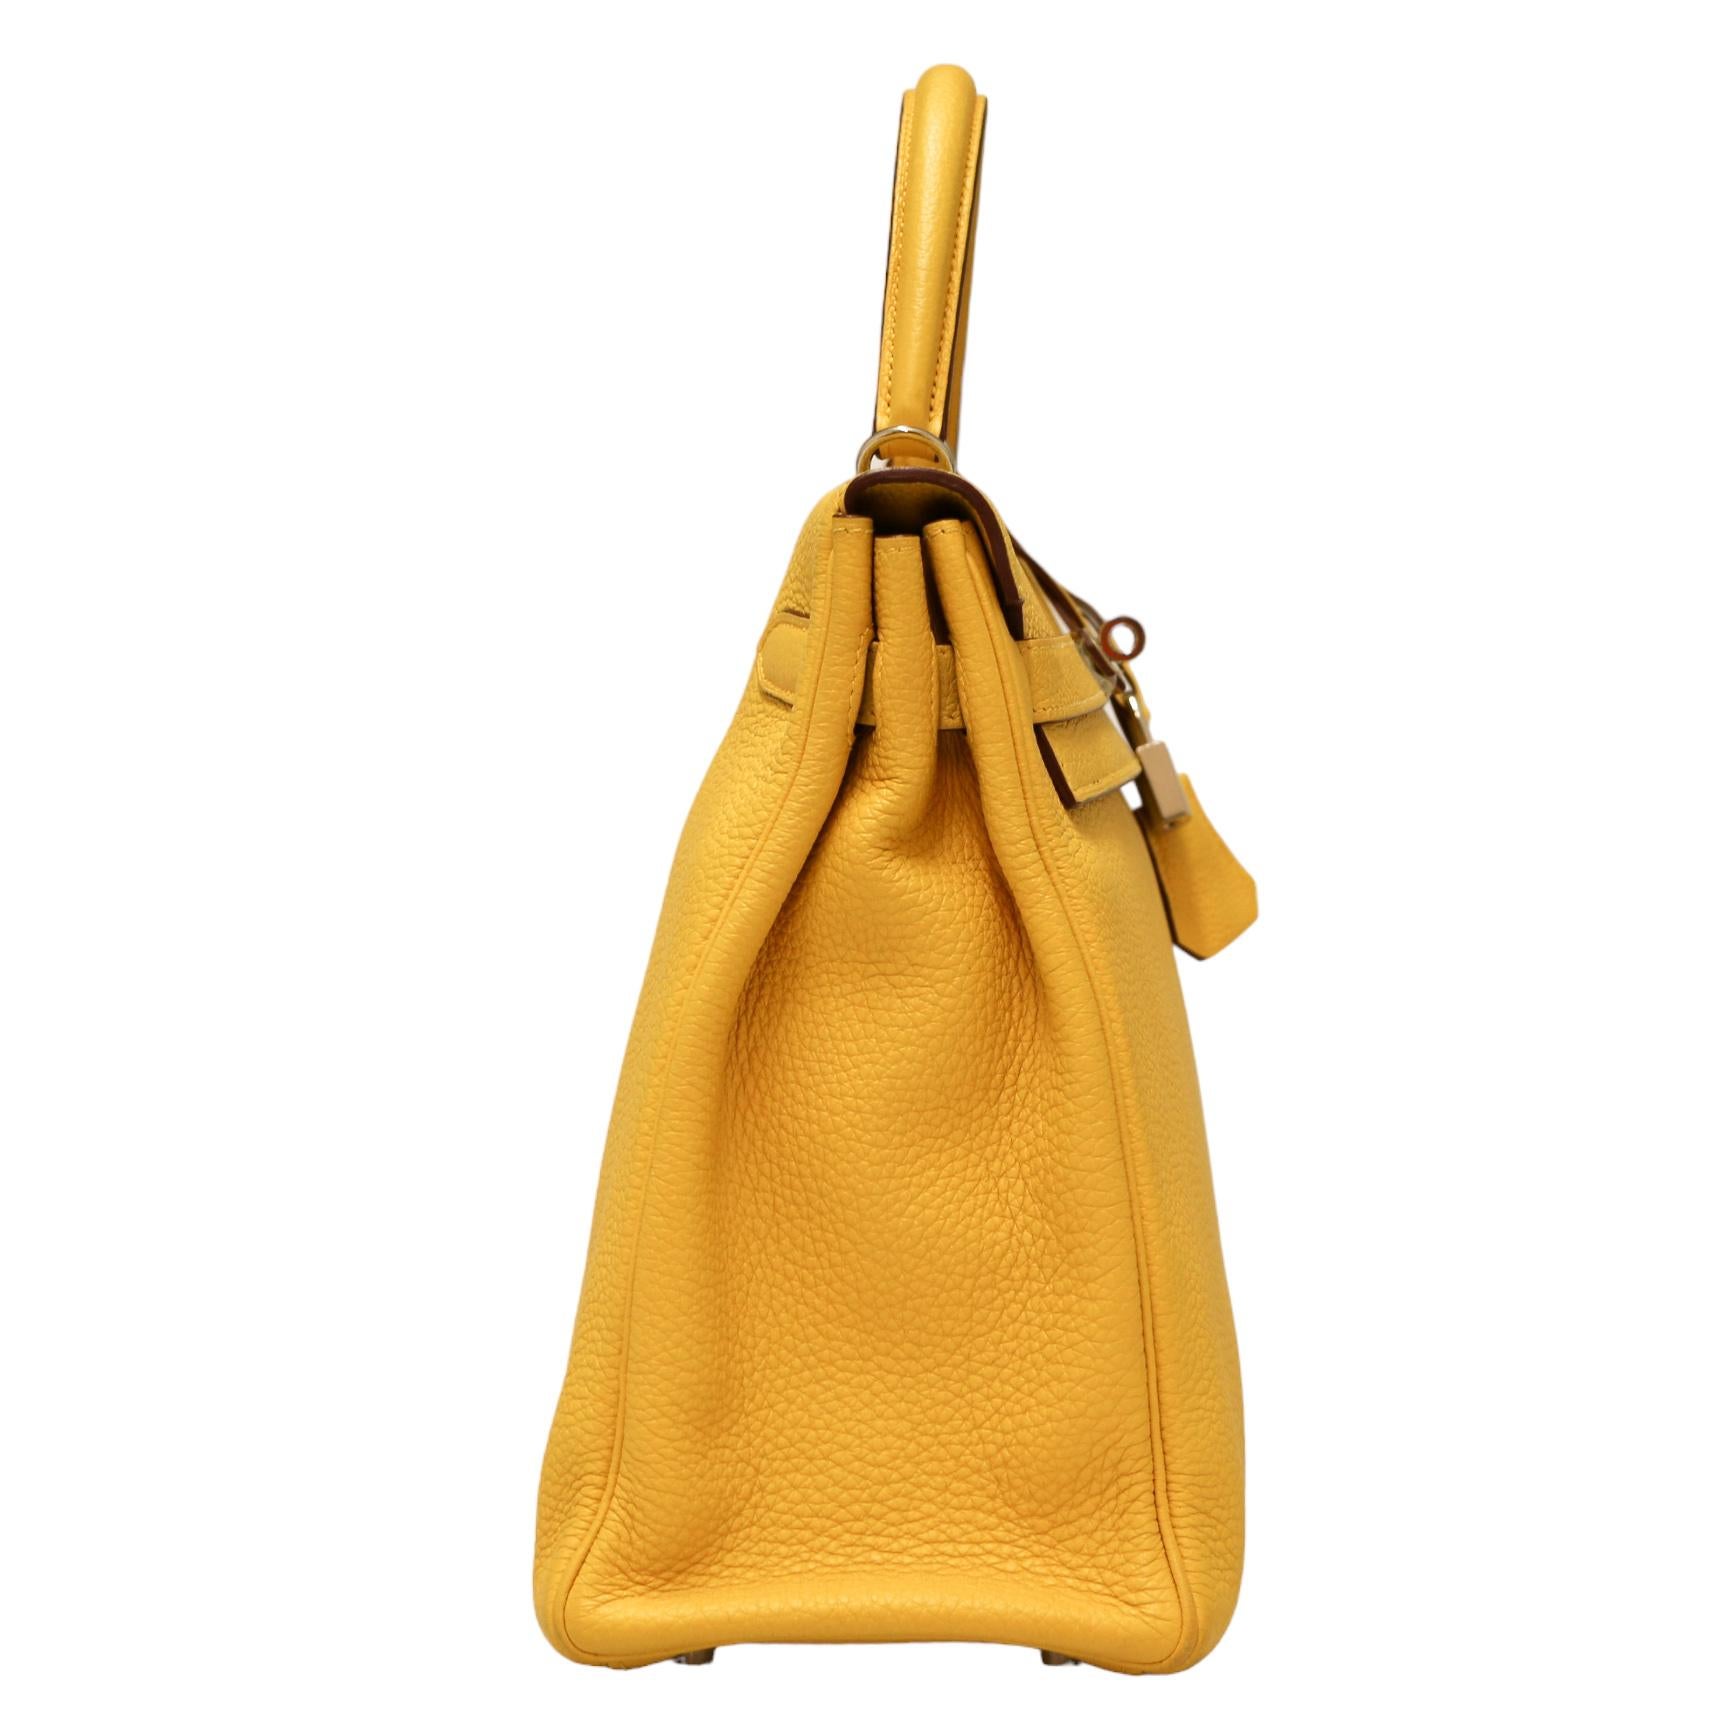 Kelly II retourné 35 HERMES Togo soleil
Condition: very good
Country of manufacture : France
Collection : Kelly II retourné
Genre : unisex
Material : togo leather
Interior : leather
Color: soleil (yellow)
Dimensions: 35 x 25 x 11 cm
Removable